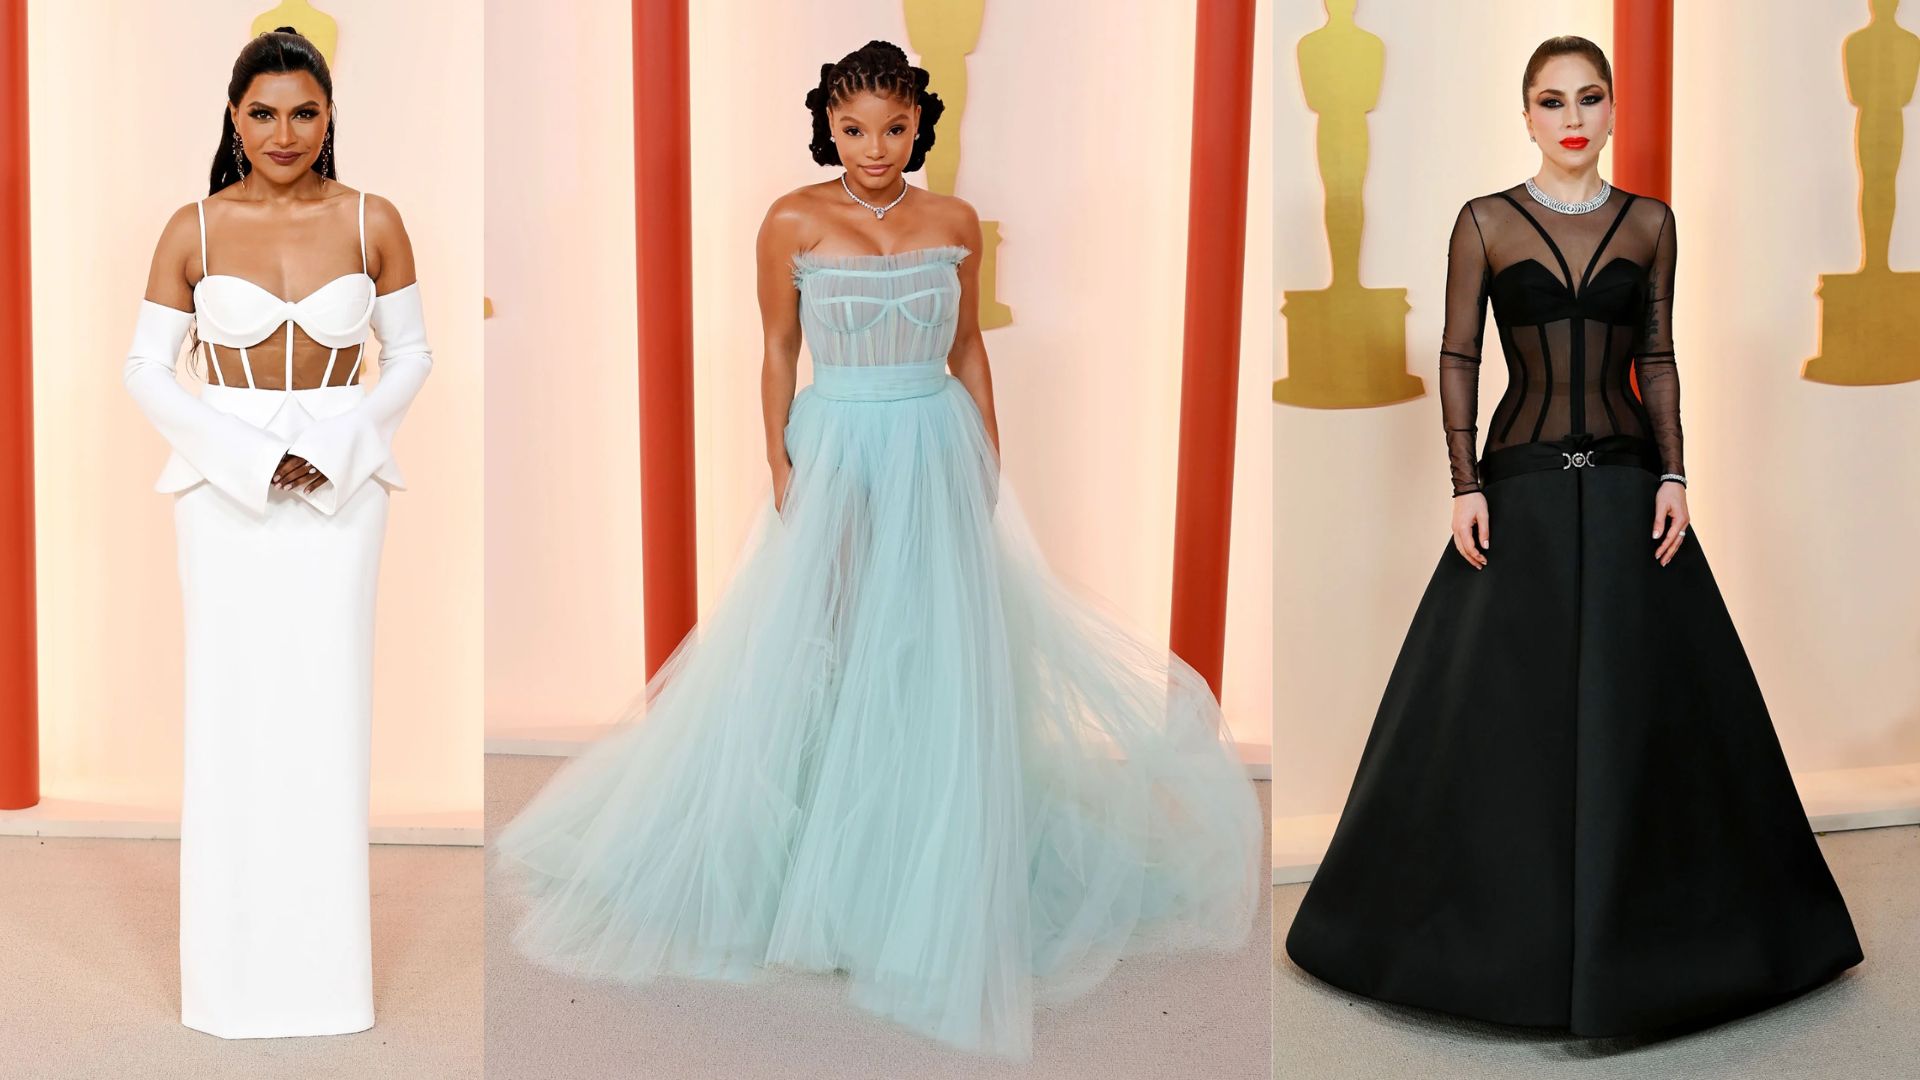 Source: https://www.usmagazine.com/stylish/pictures/oscars-2023-red-carpet-fashion-see-what-the-stars-wore/